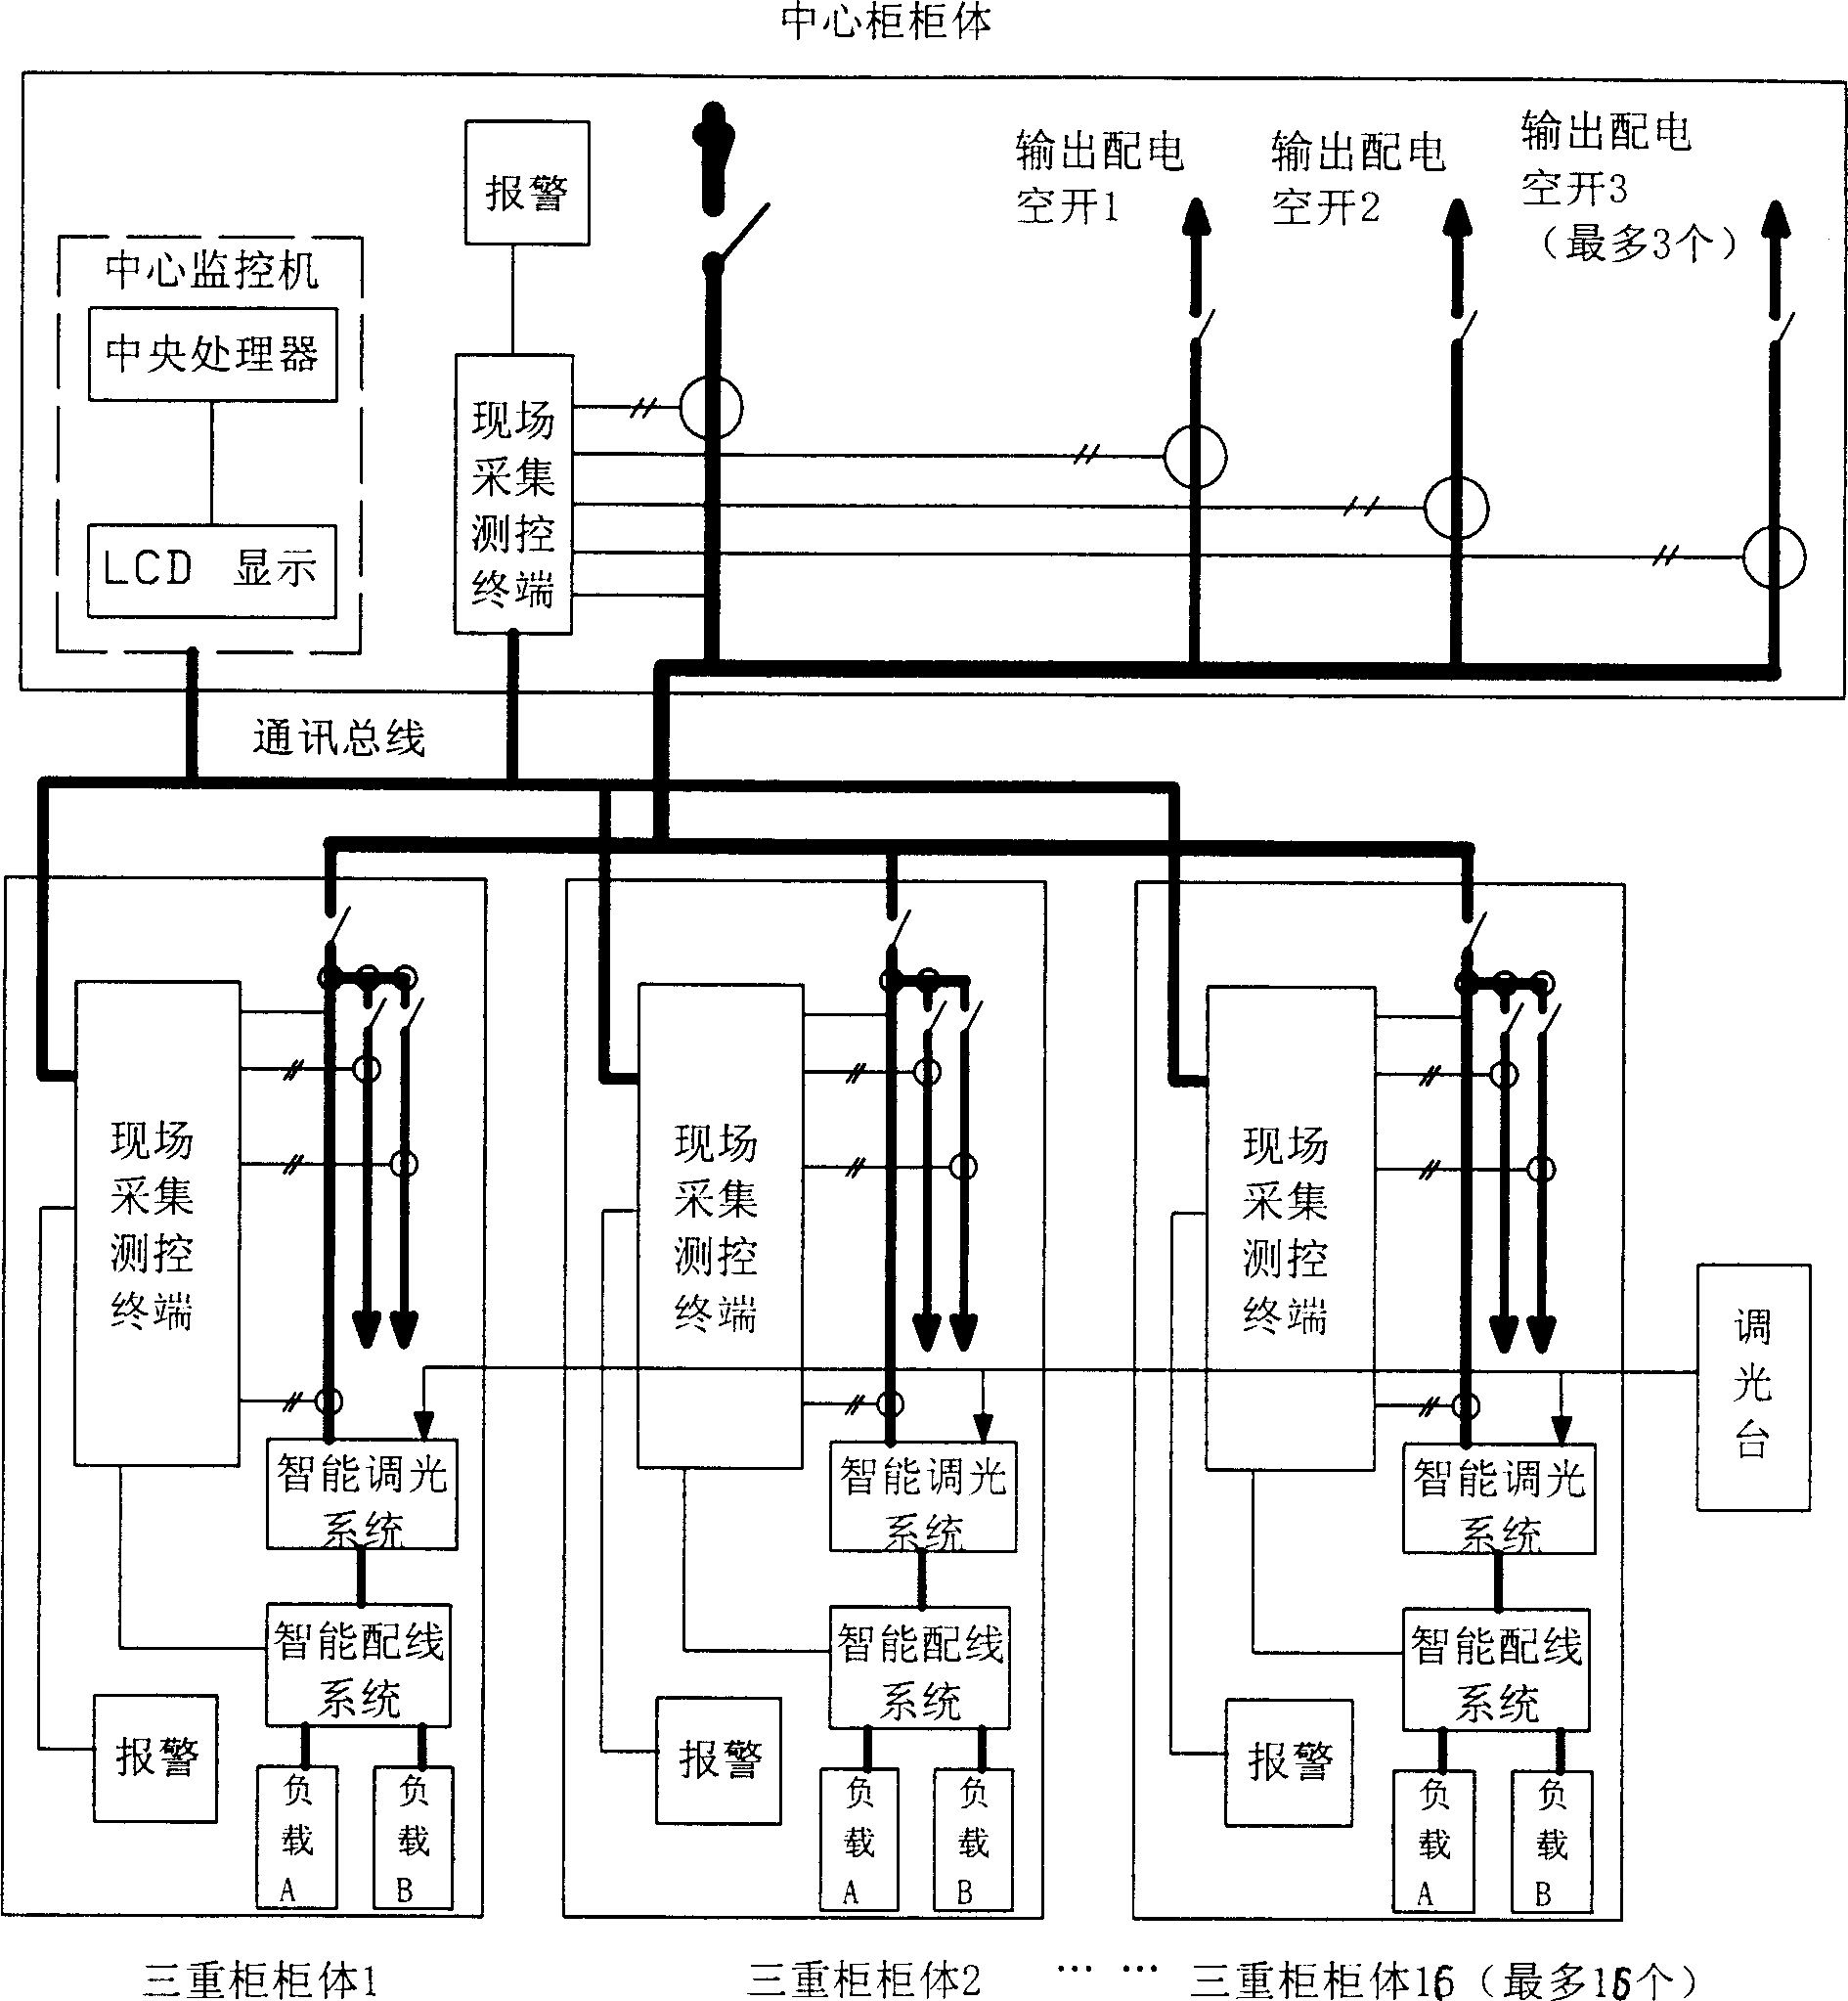 Light-adjusting and power distribution system used in full-function telestudio stage